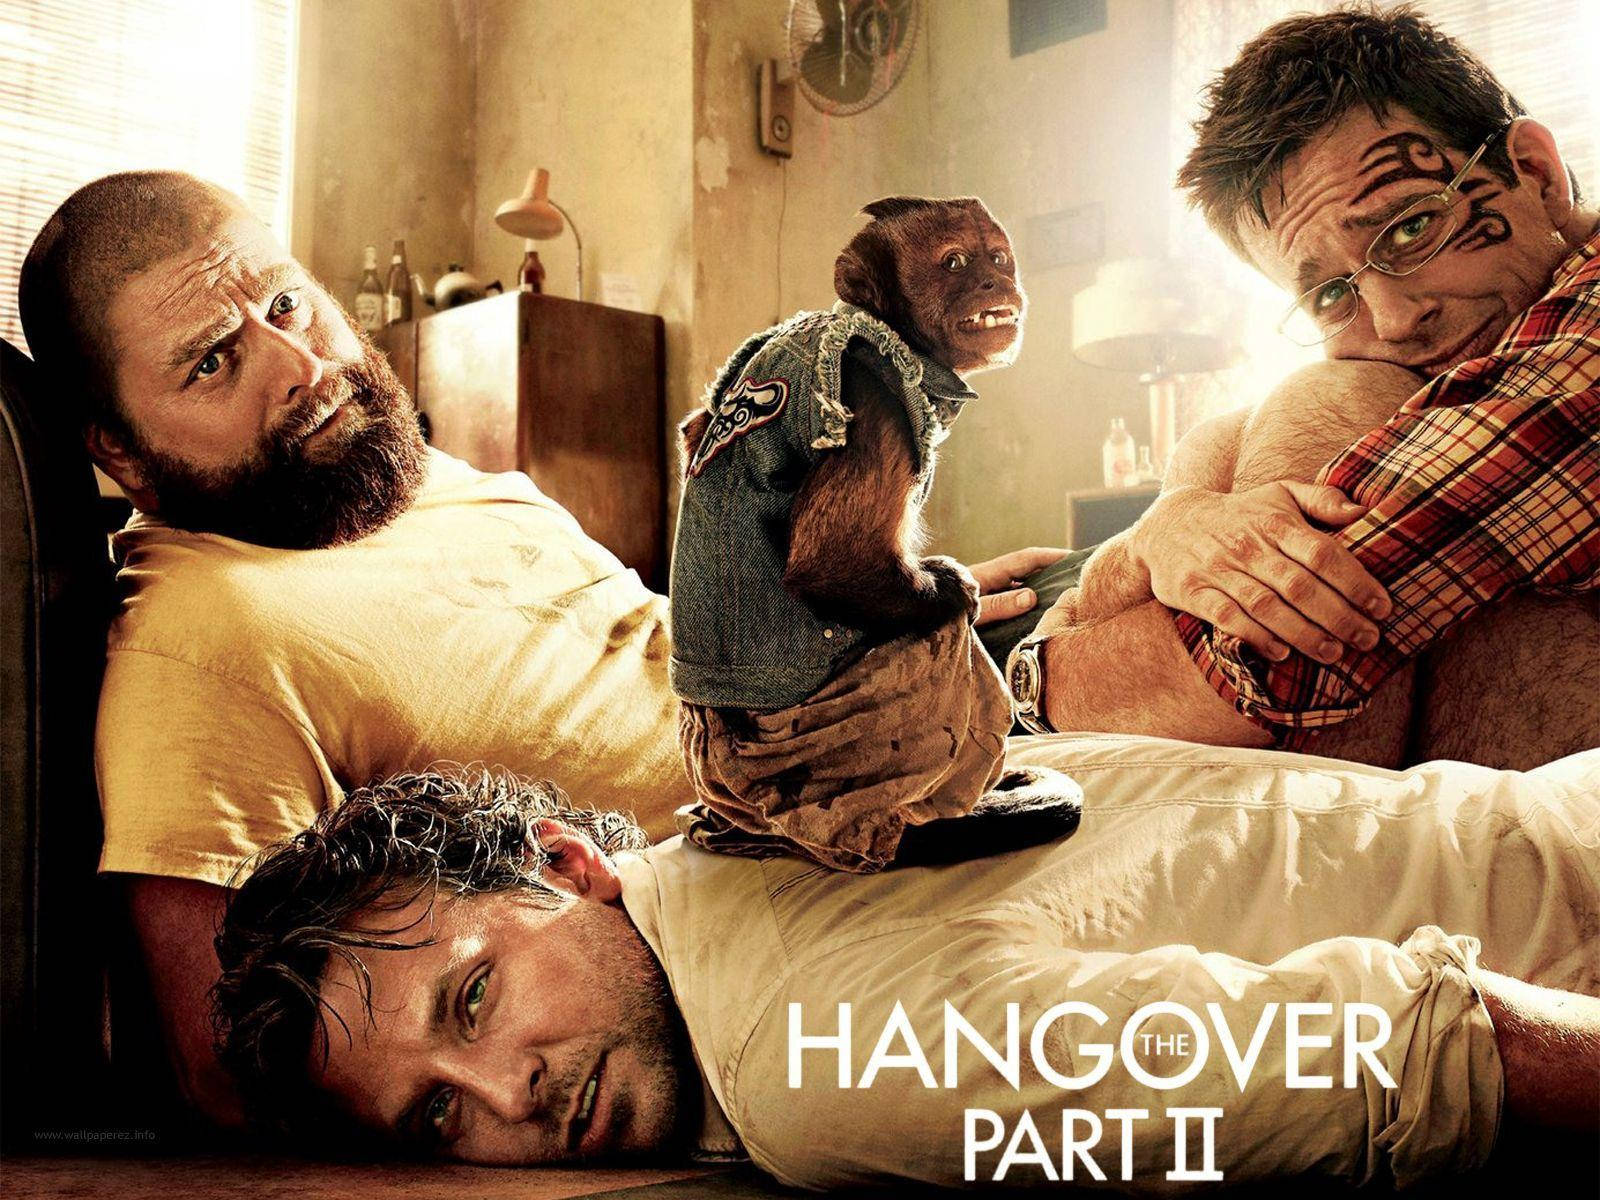 The Hangover Part Ii 2011 American Comedy Movie Wallpaper